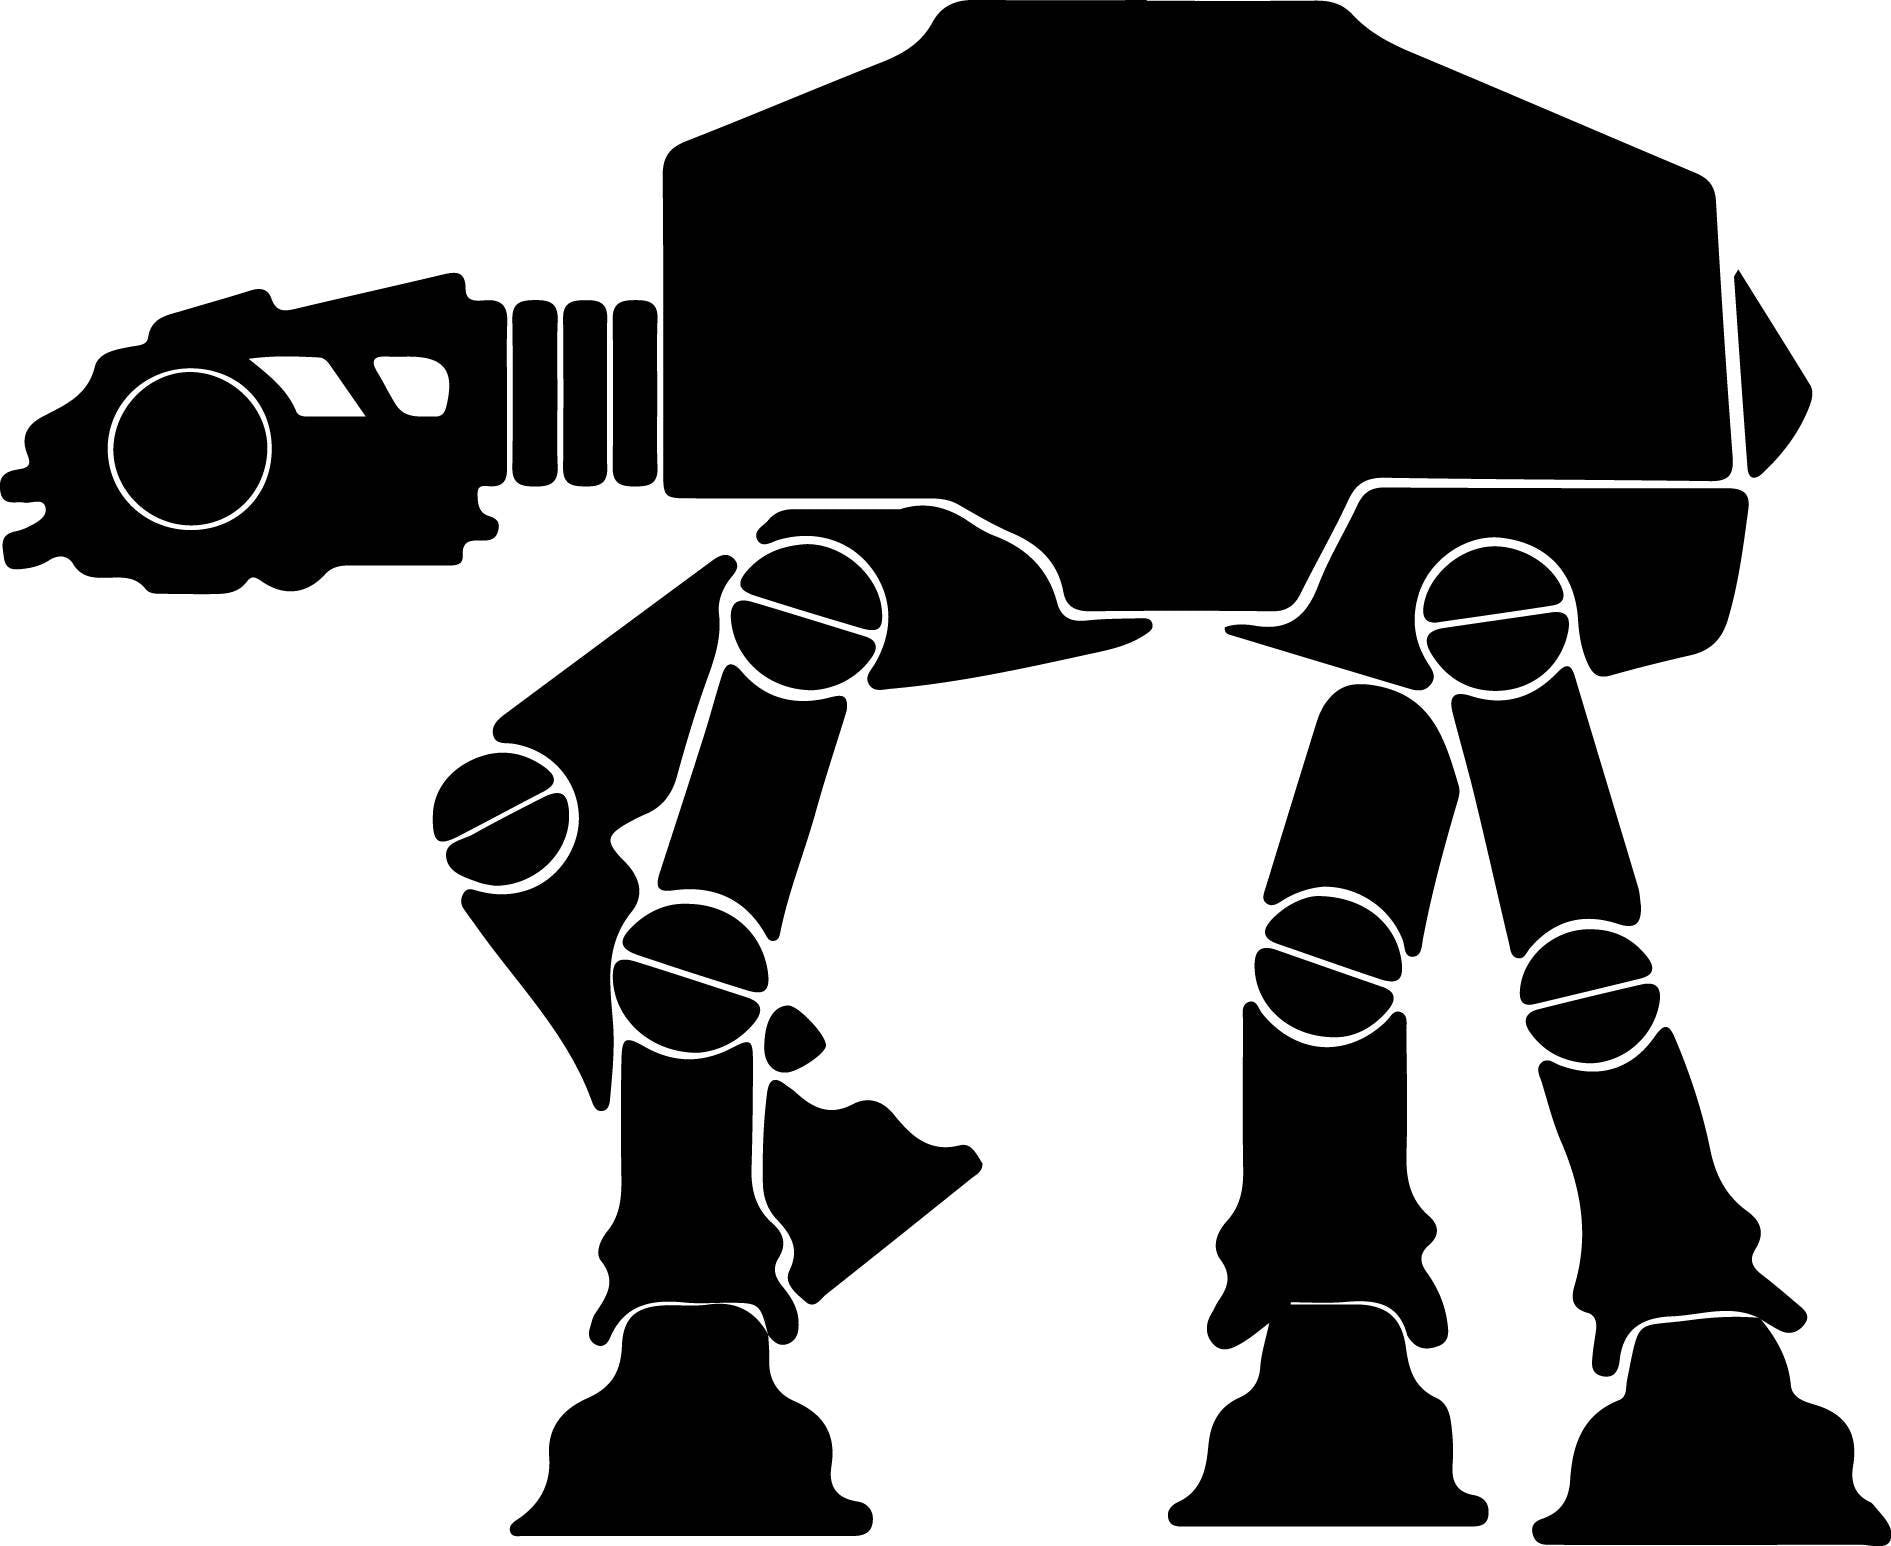 Download Star wars Svg Files Silhouettes Dxf Files Cutting files Cricut